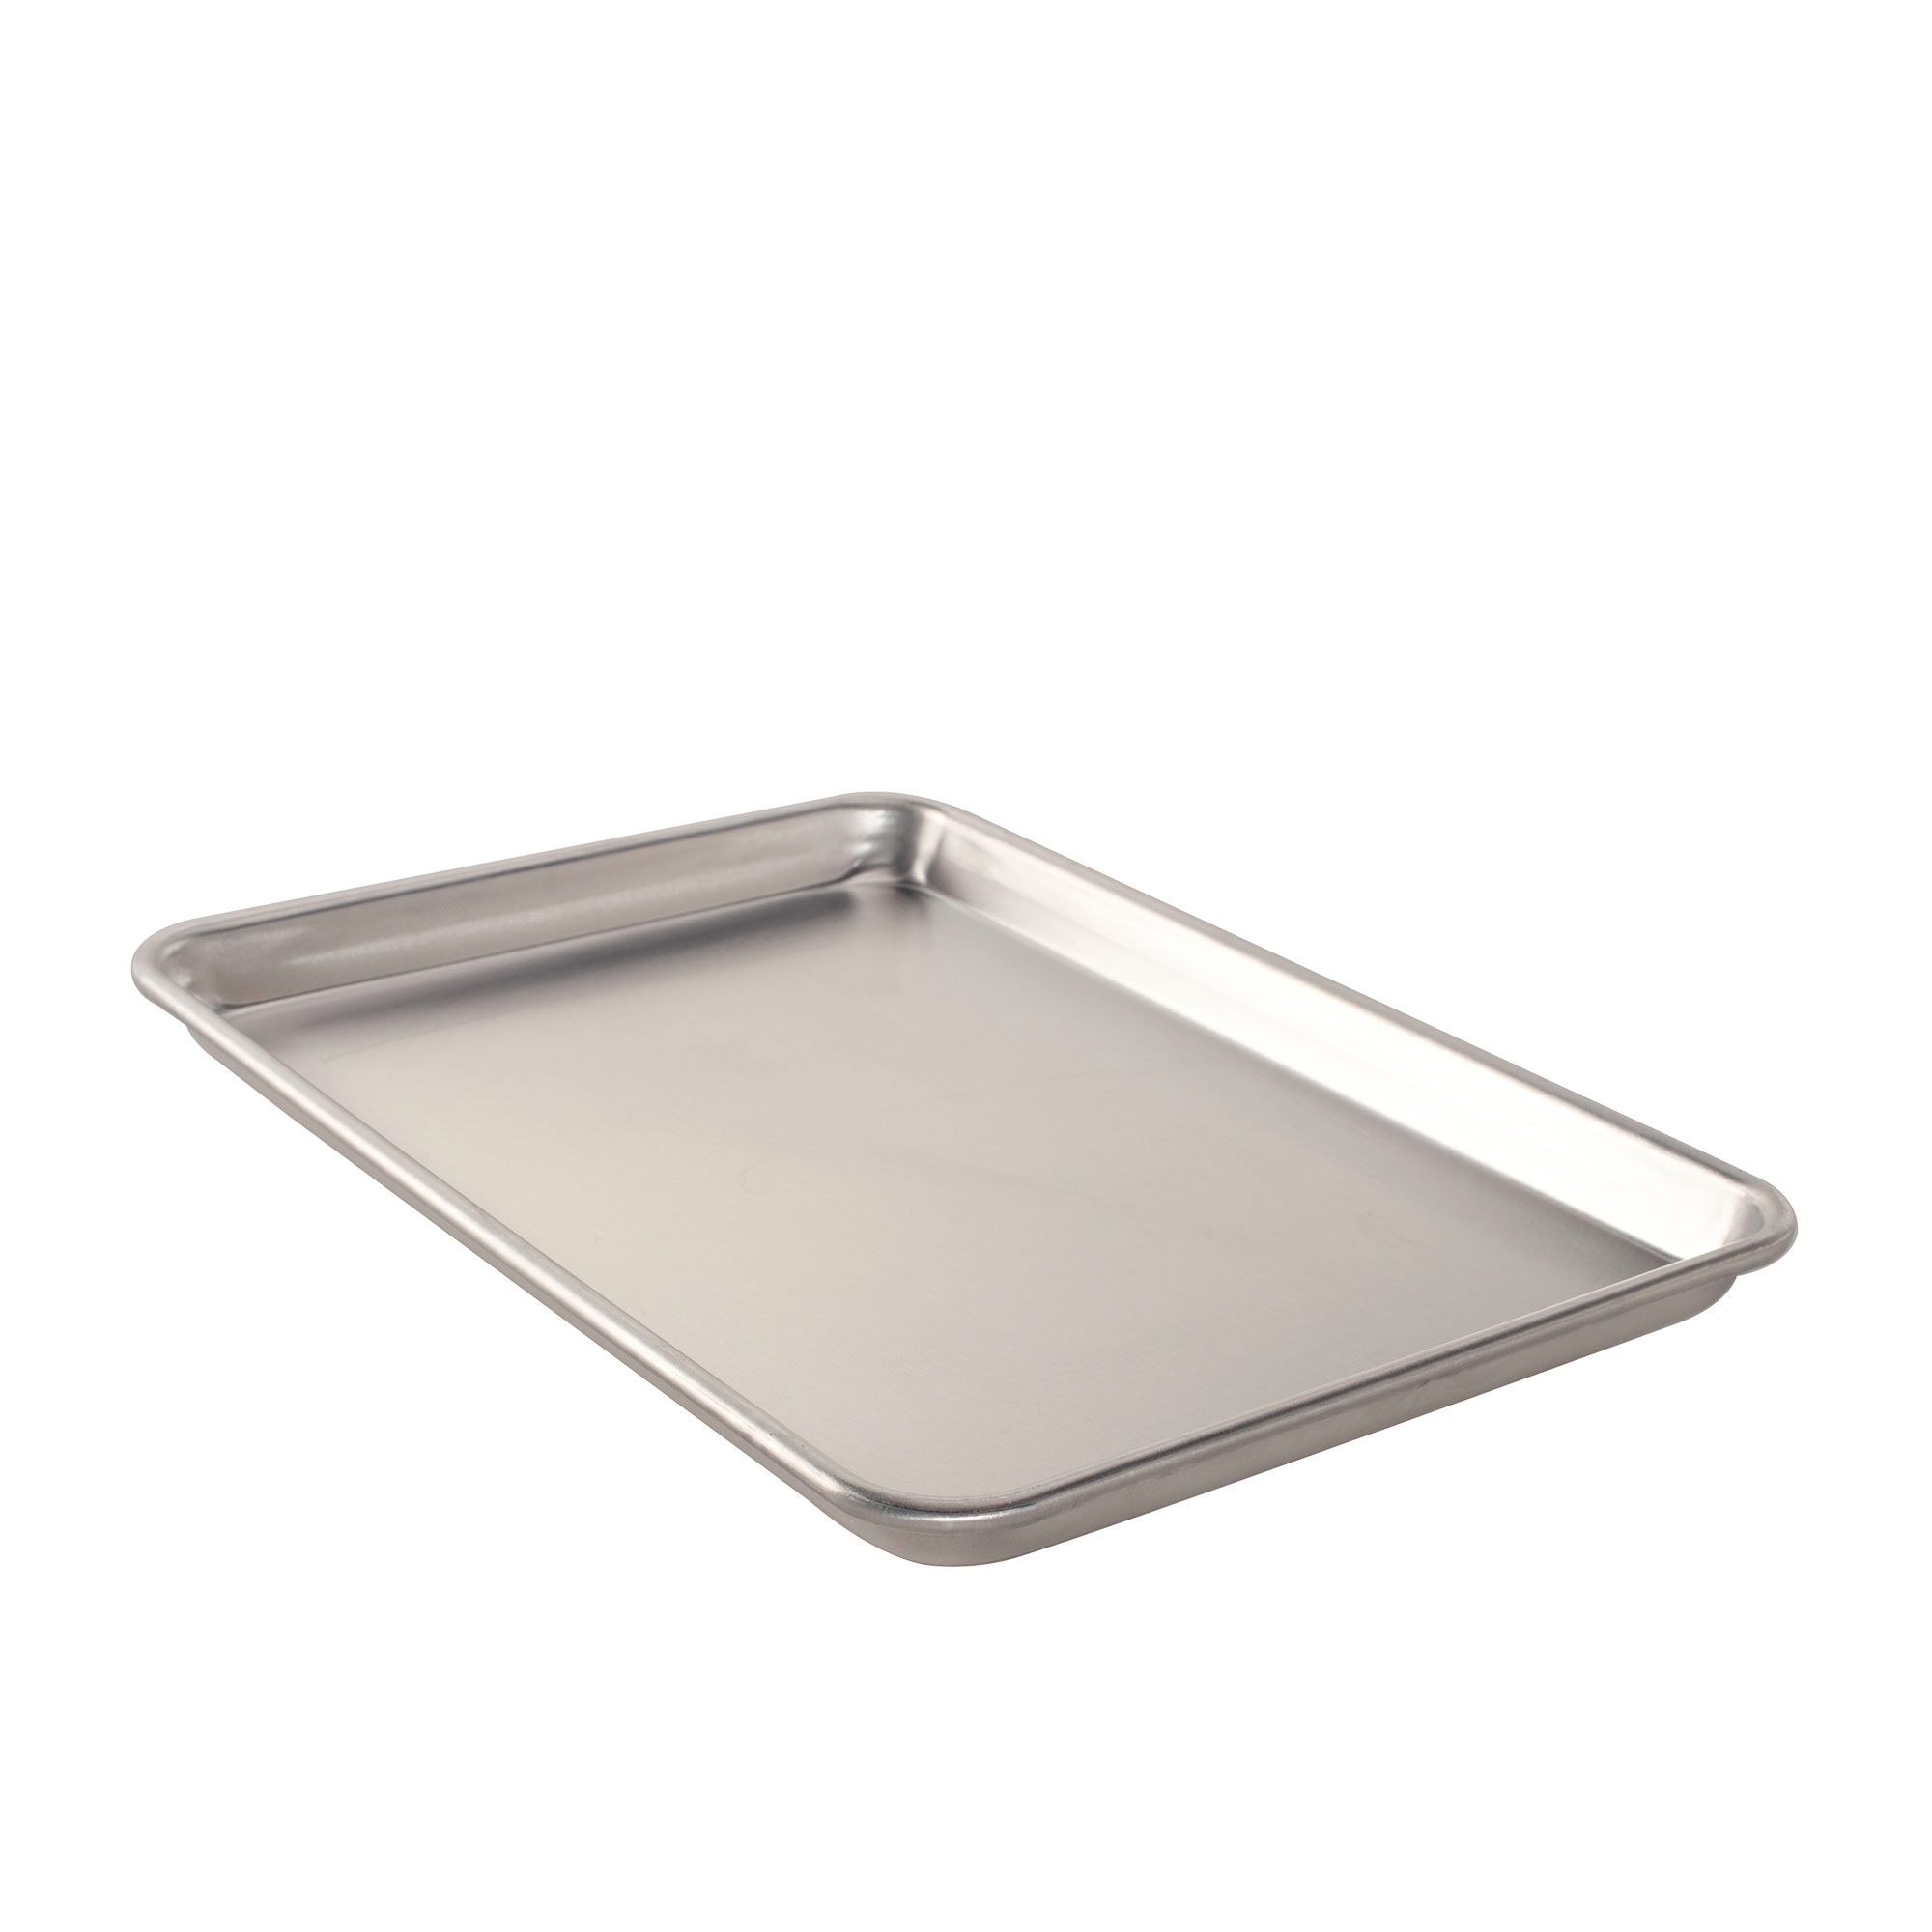 Nordic Ware Naturals Jelly Roll Baking Sheet 40cm Image 1